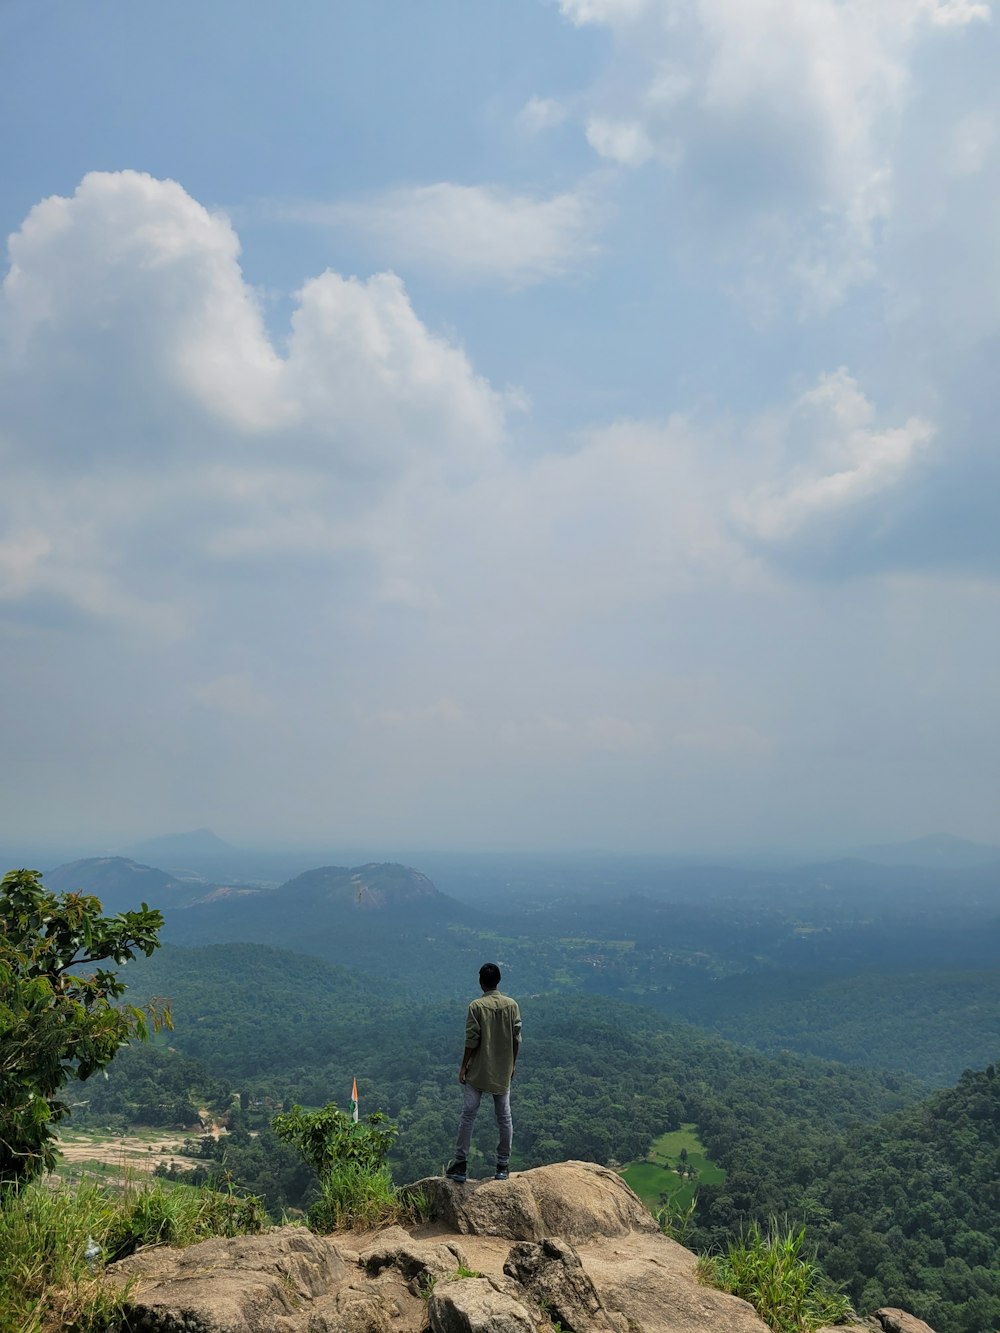 a person standing on a rock overlooking a valley